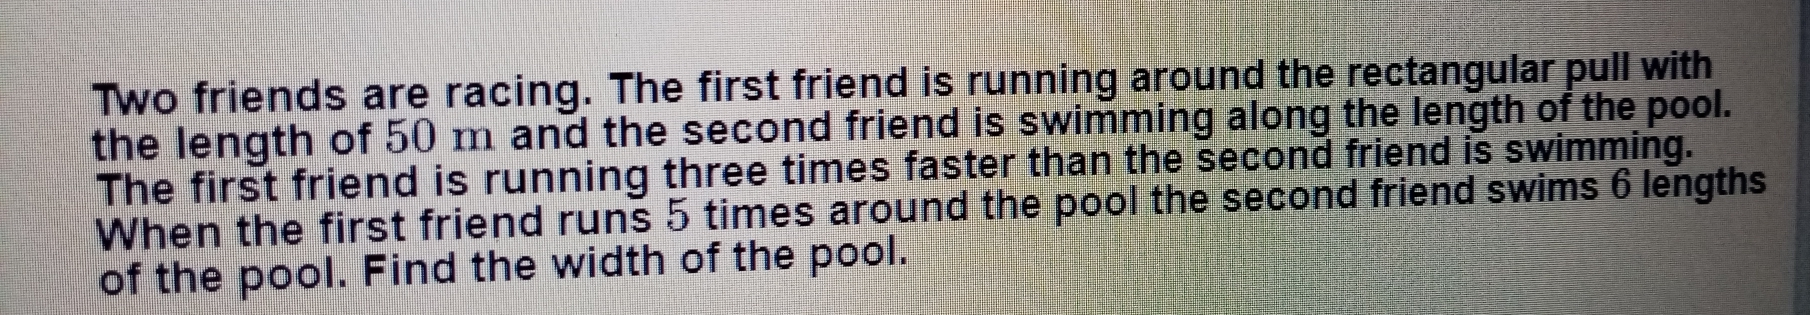 Two friends are racing. The first friend is running around the rectangular pull with the length of 50 m and the second friend is swimming along the length of the pool. The first friend is running three times faster than the second friend is swimming. When the first friend runs 5 times around the pool the second friend swims 6 lengths of the pool. Find the width of the pool.